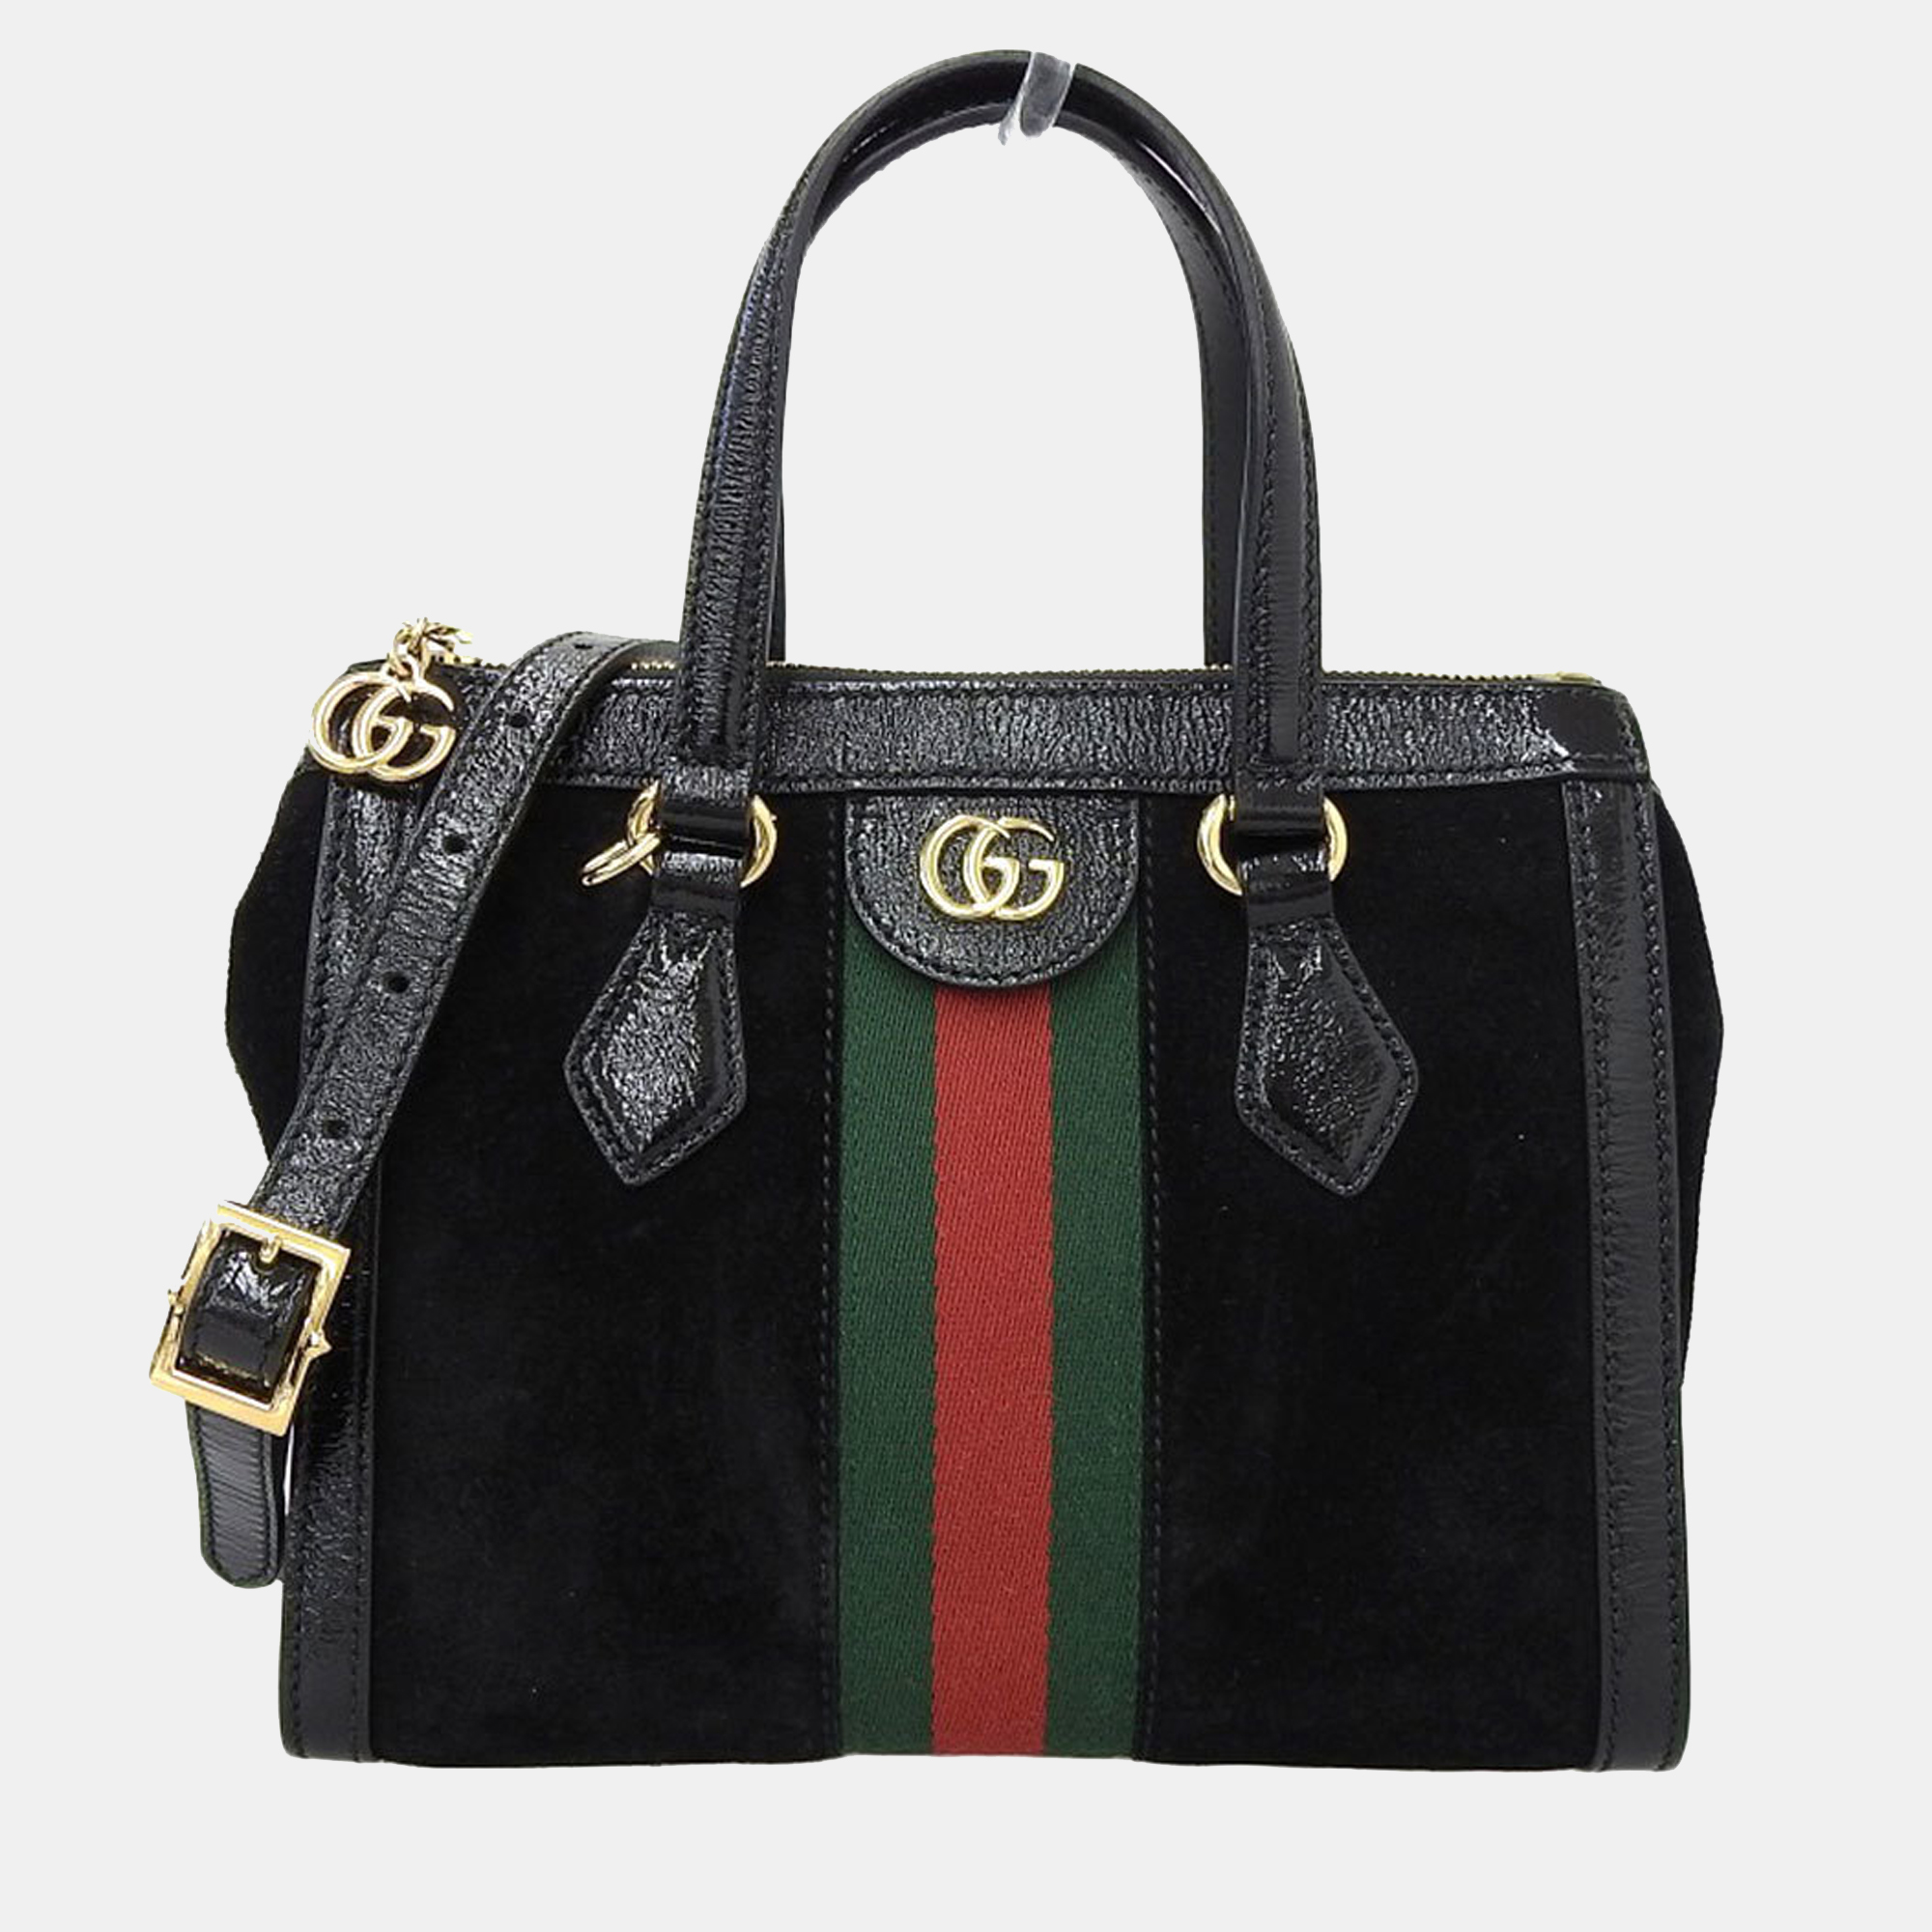 Pre-owned Gucci Black Leather And Suede Ophidia Tote Bag